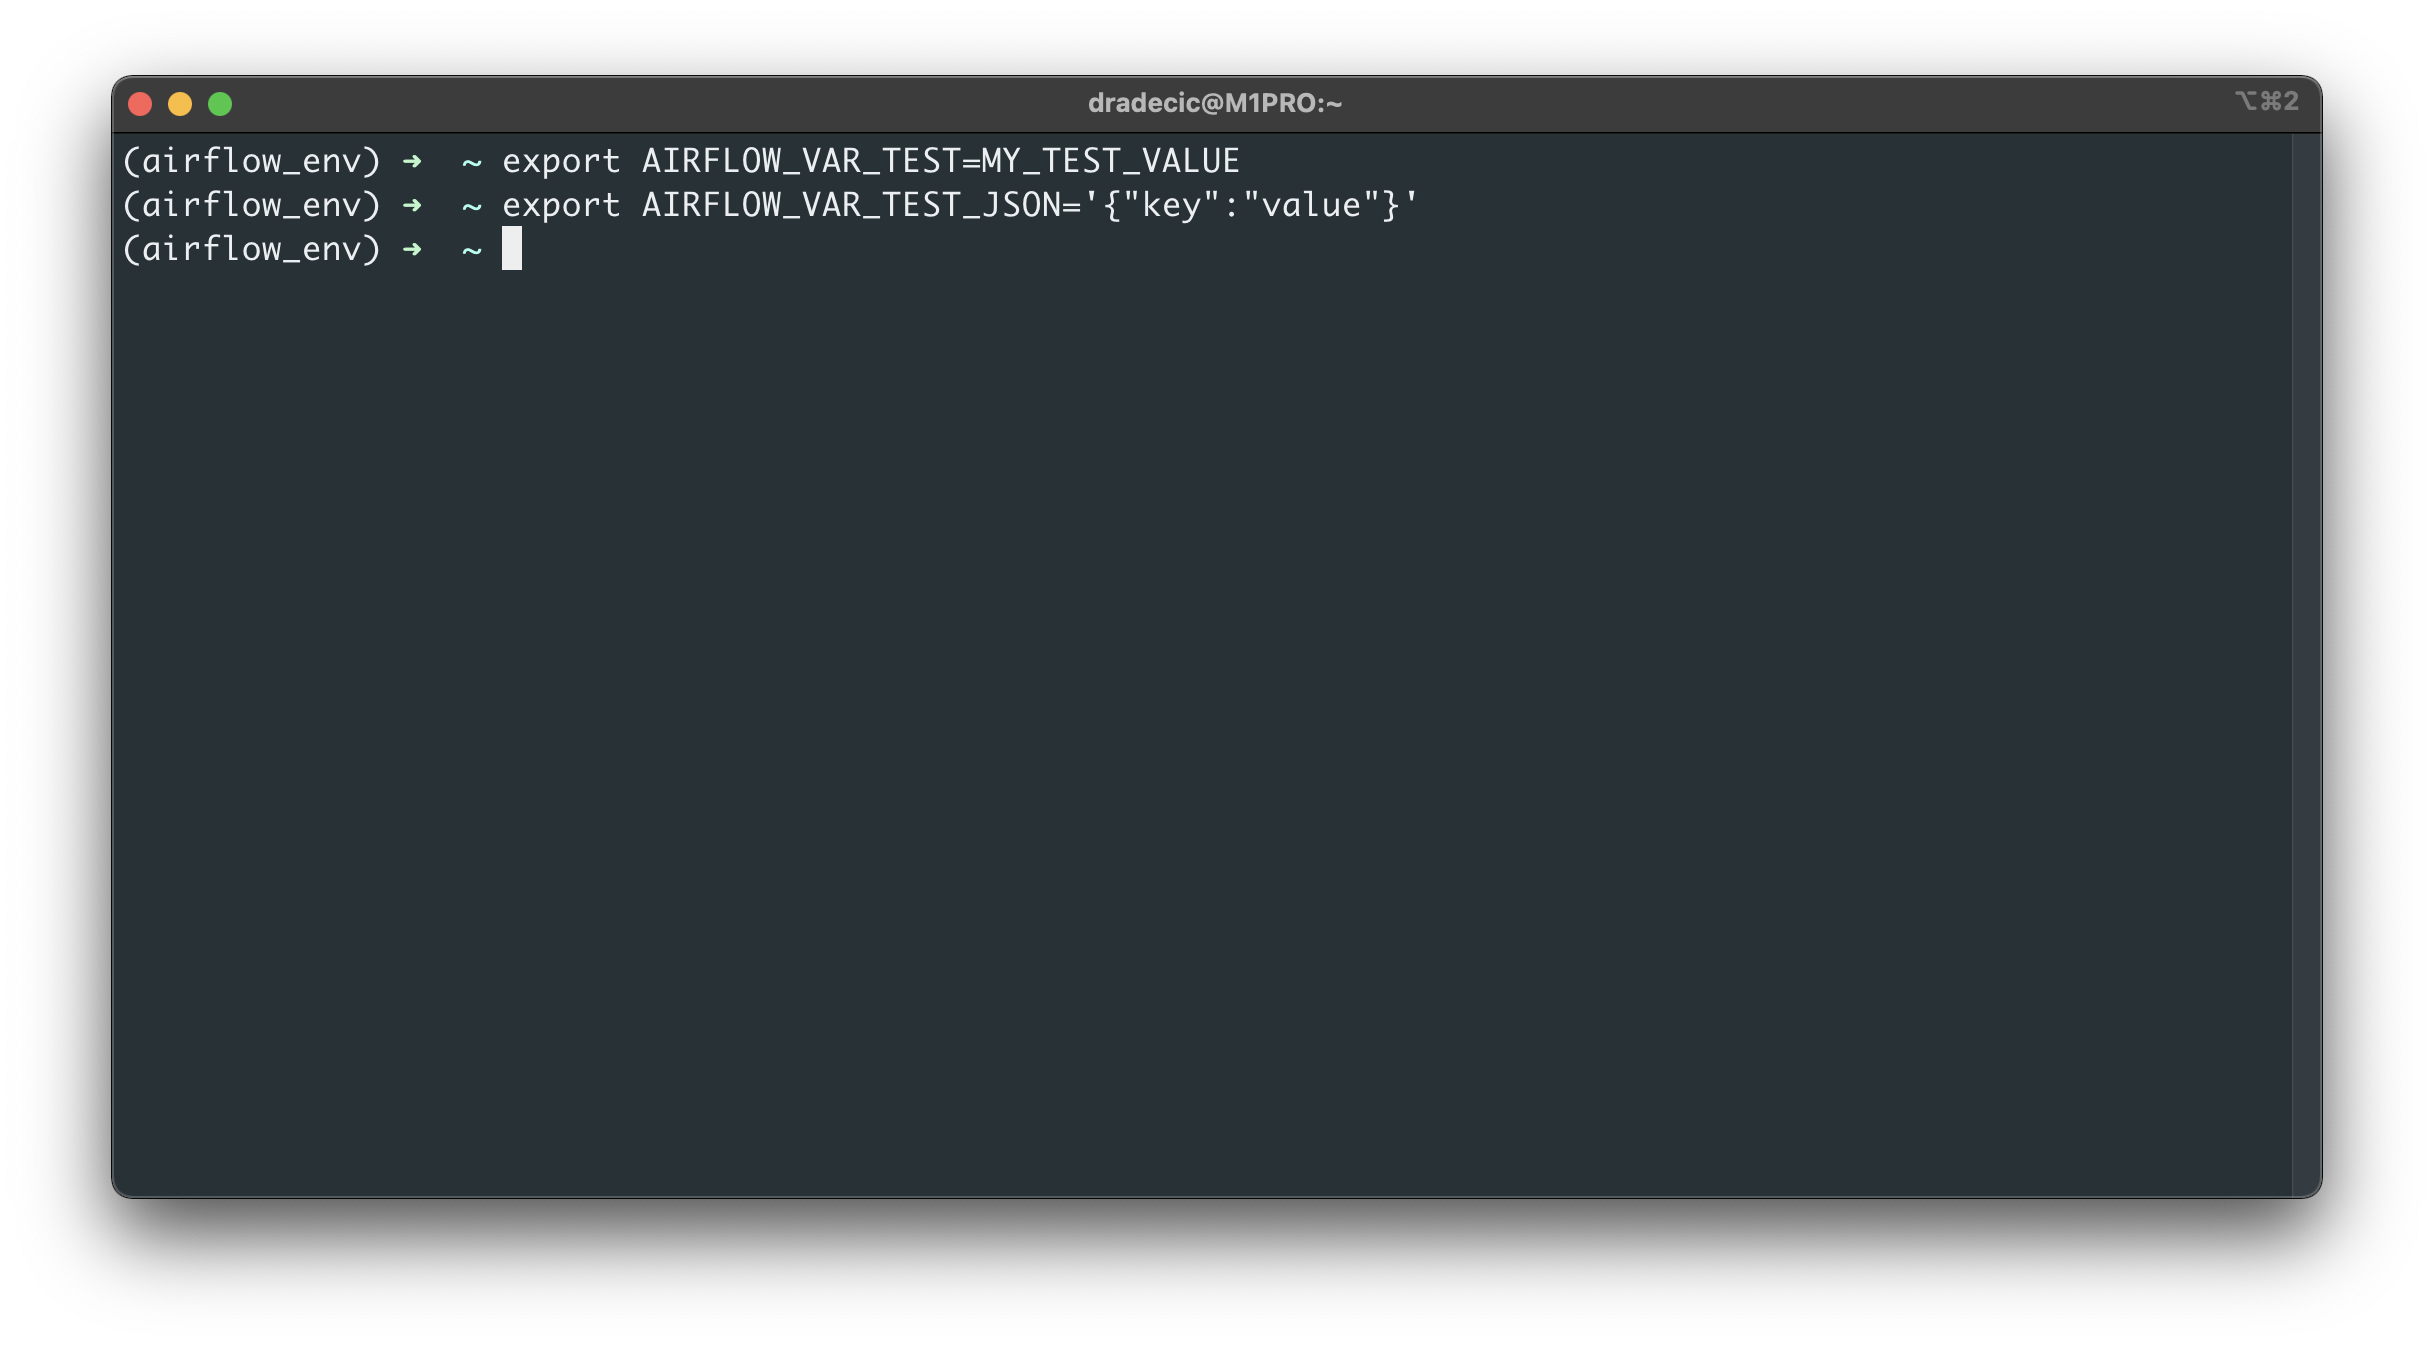 Image 5 - Adding Airflow variables through the Terminal (image by author)